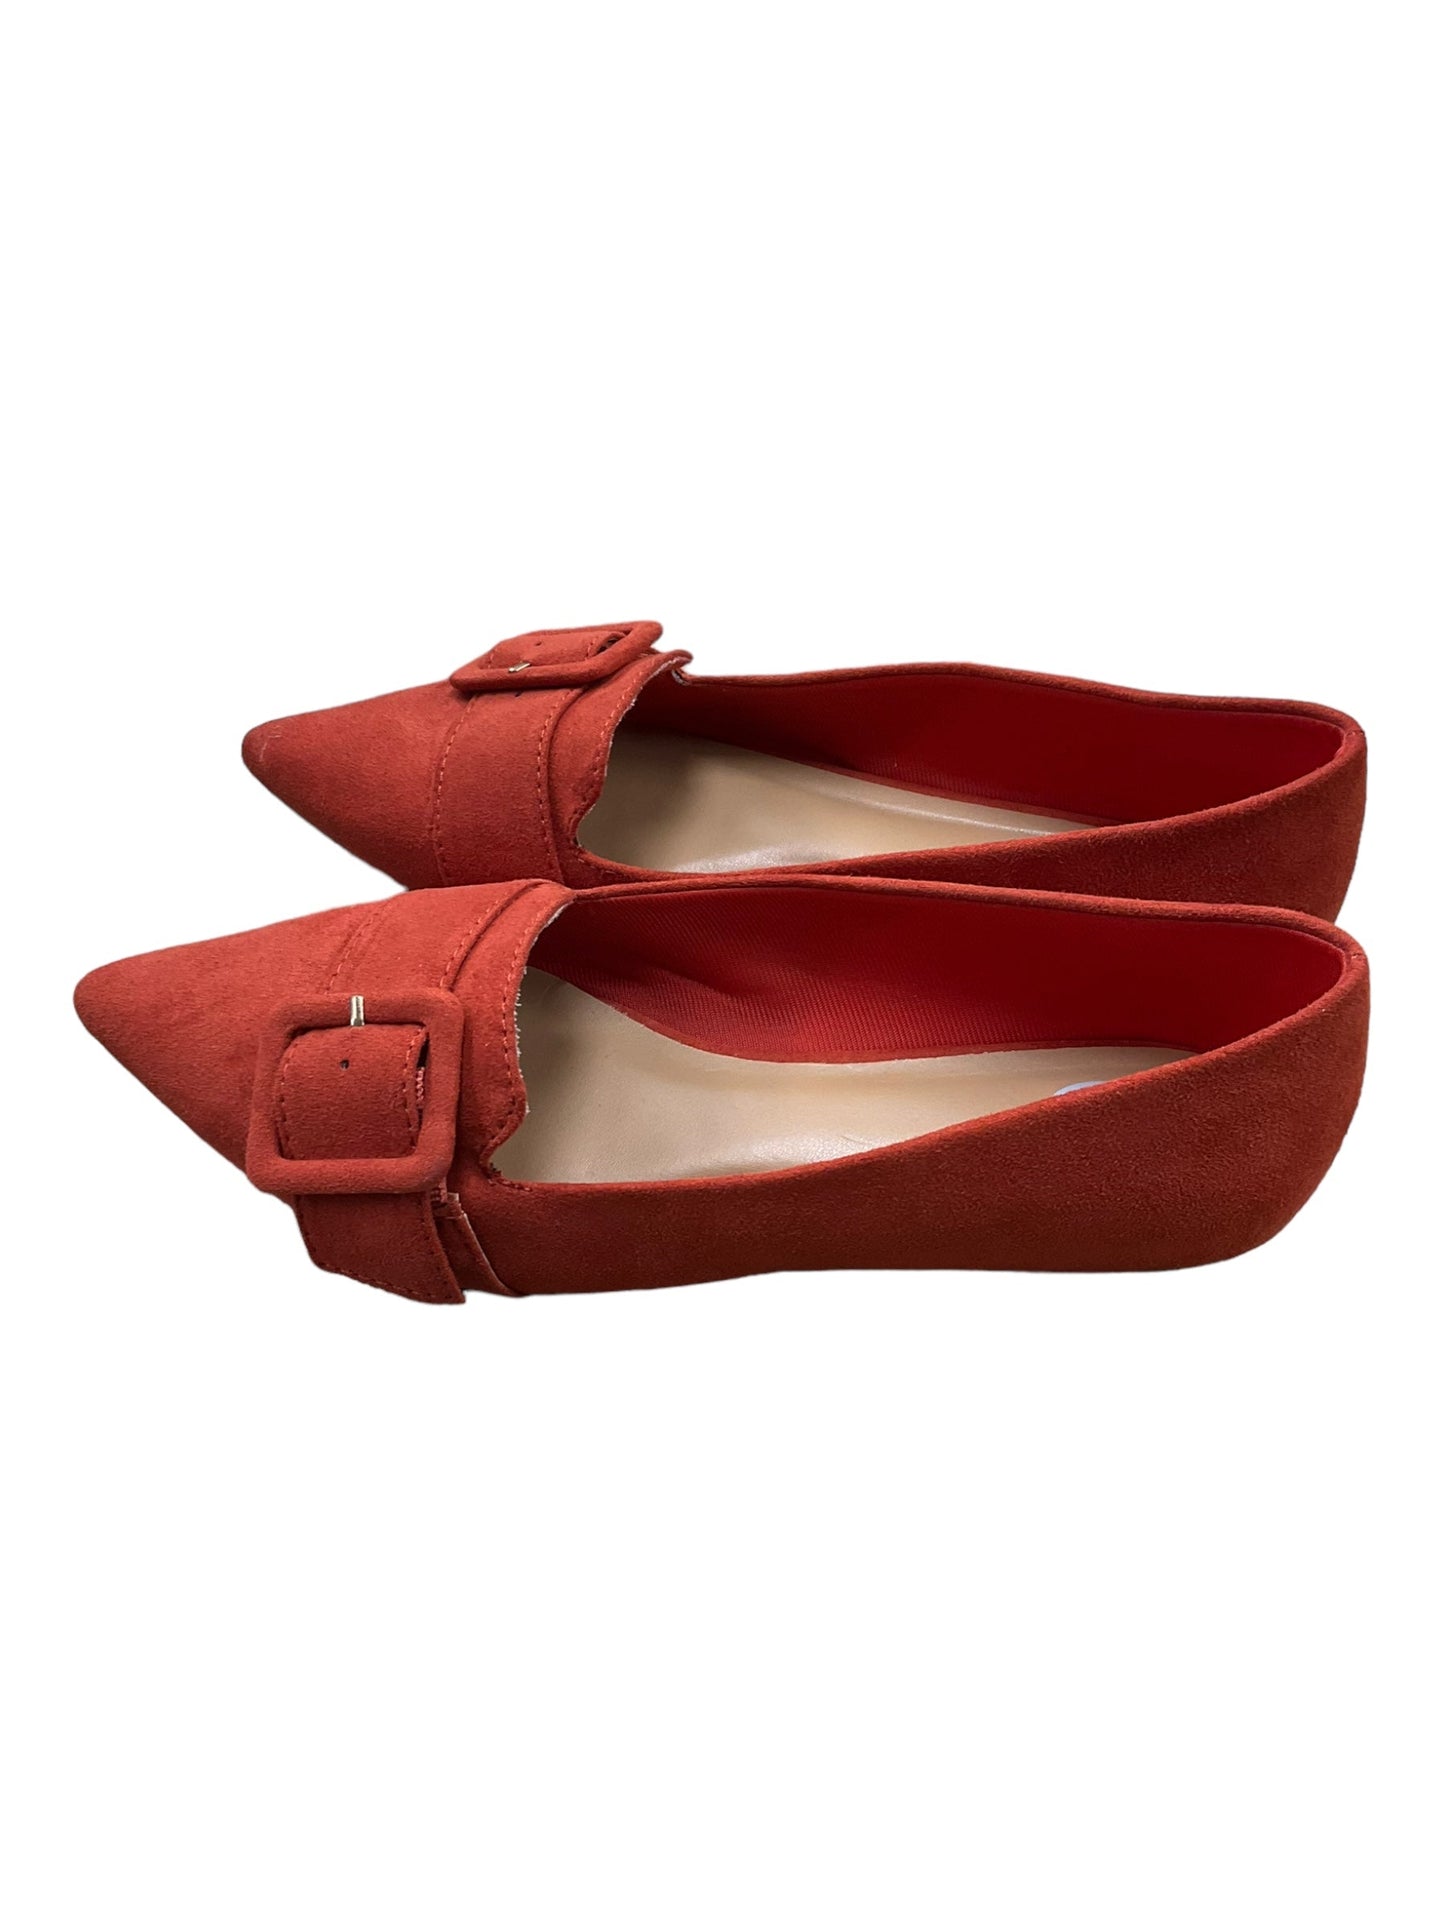 Shoes Flats Ballet By Clothes Mentor  Size: 5.5